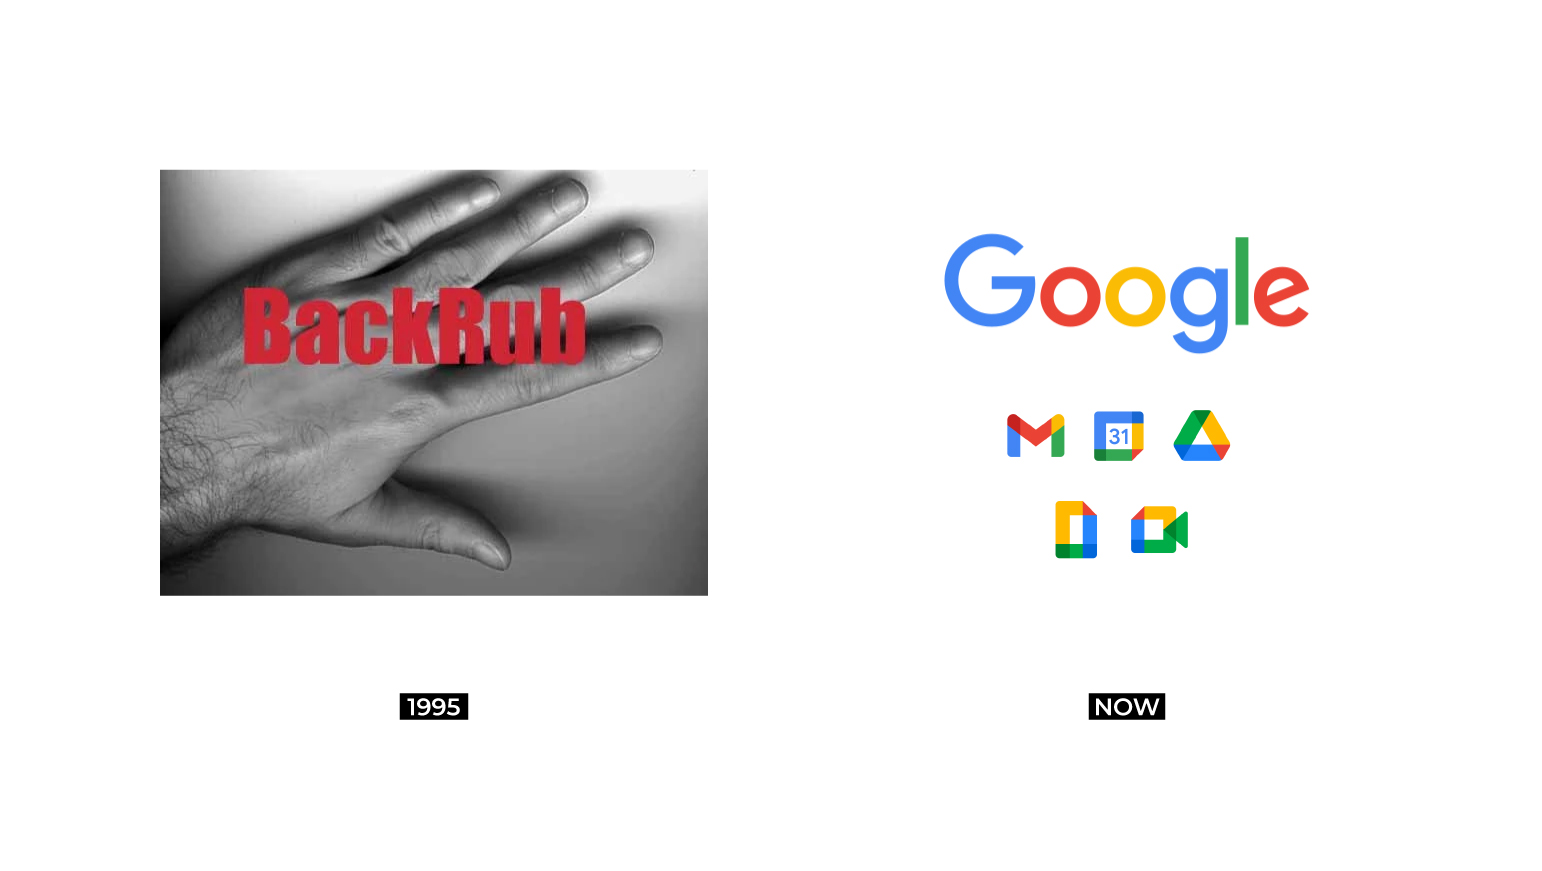 Google Backrub Rebrand Before & After Graphic